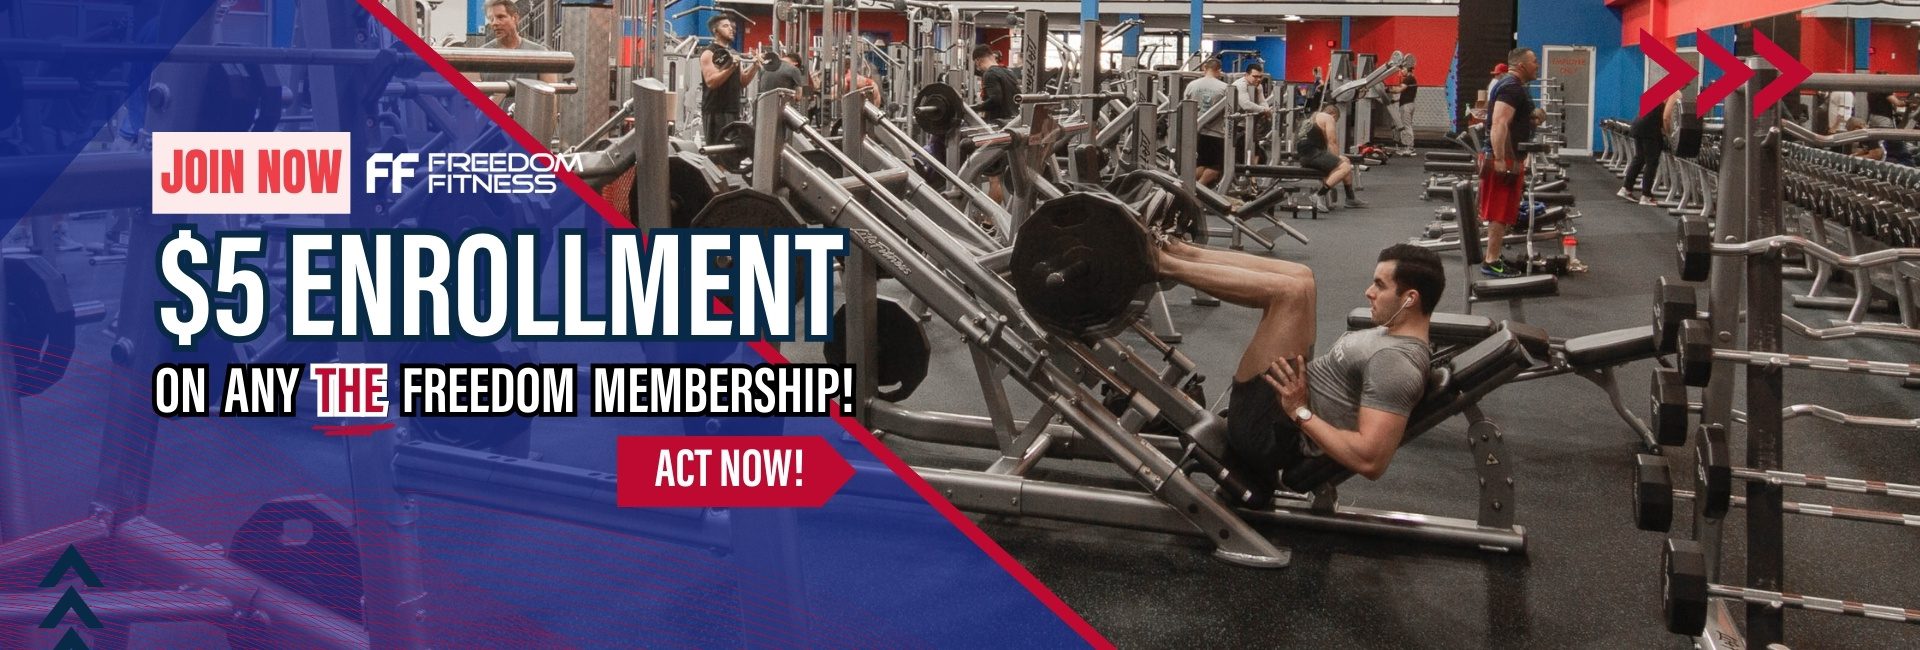 may $5 enrollment on any the freedom membership